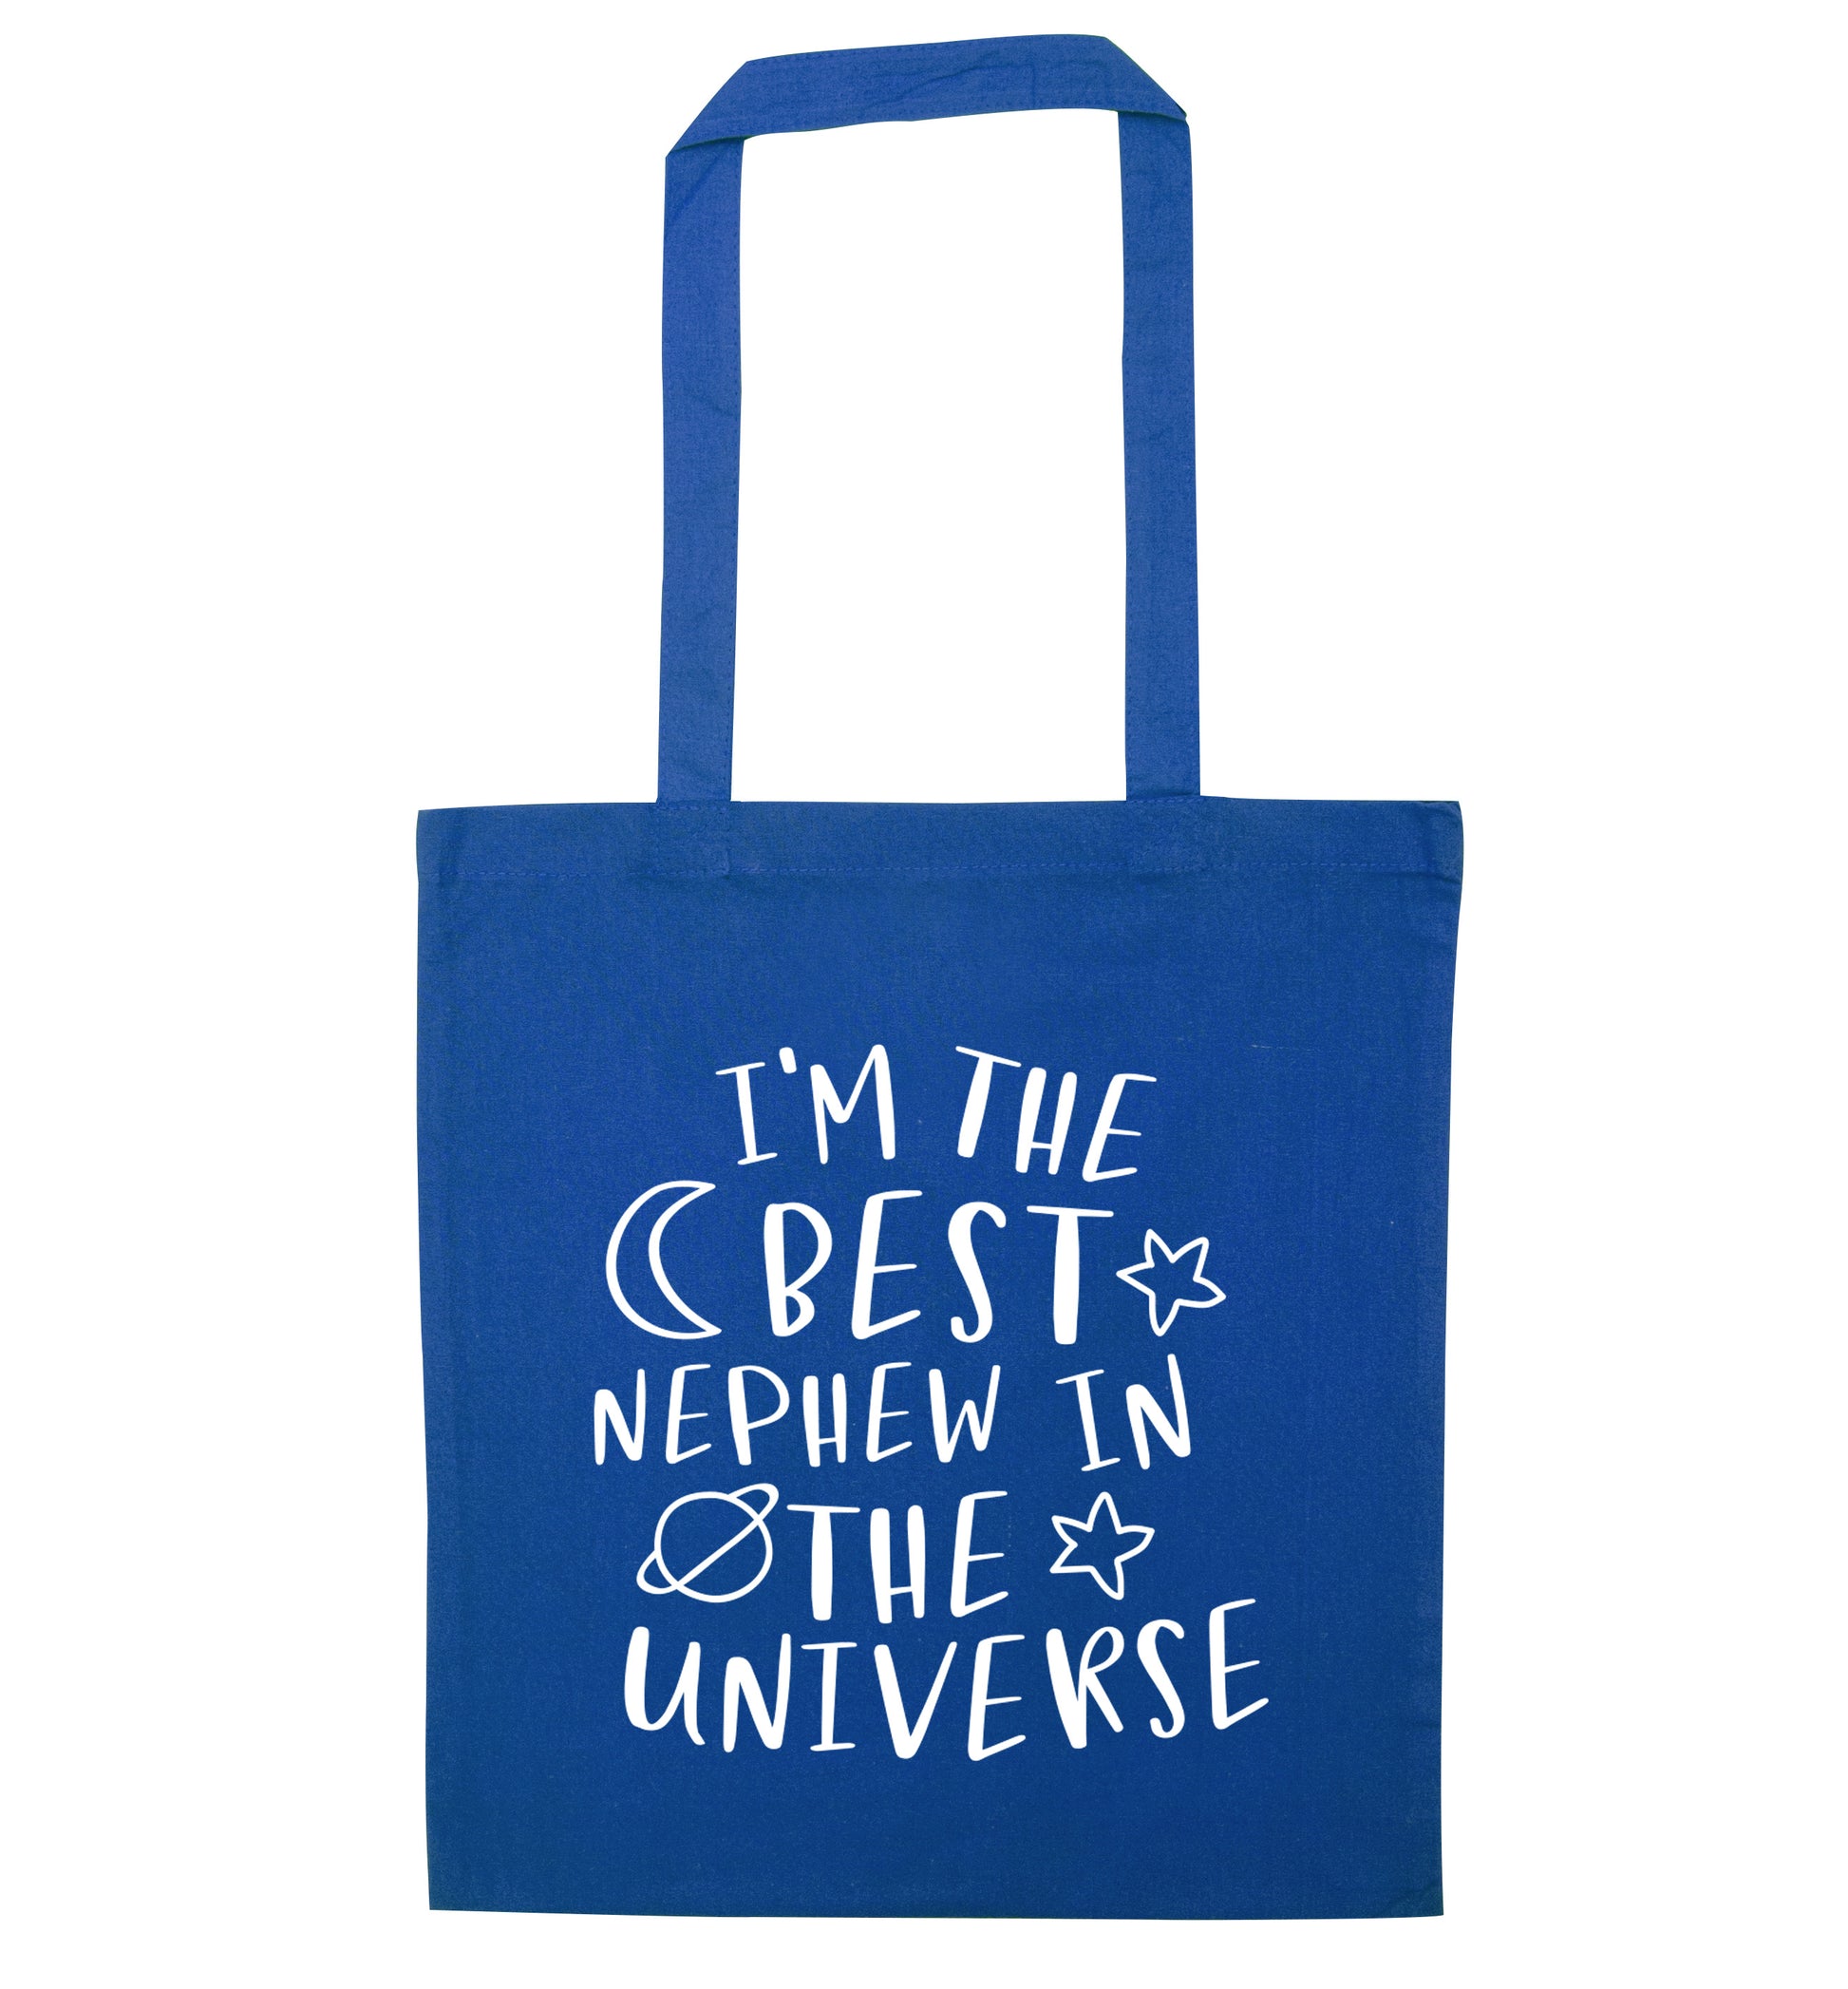 I'm the best nephew in the universe blue tote bag